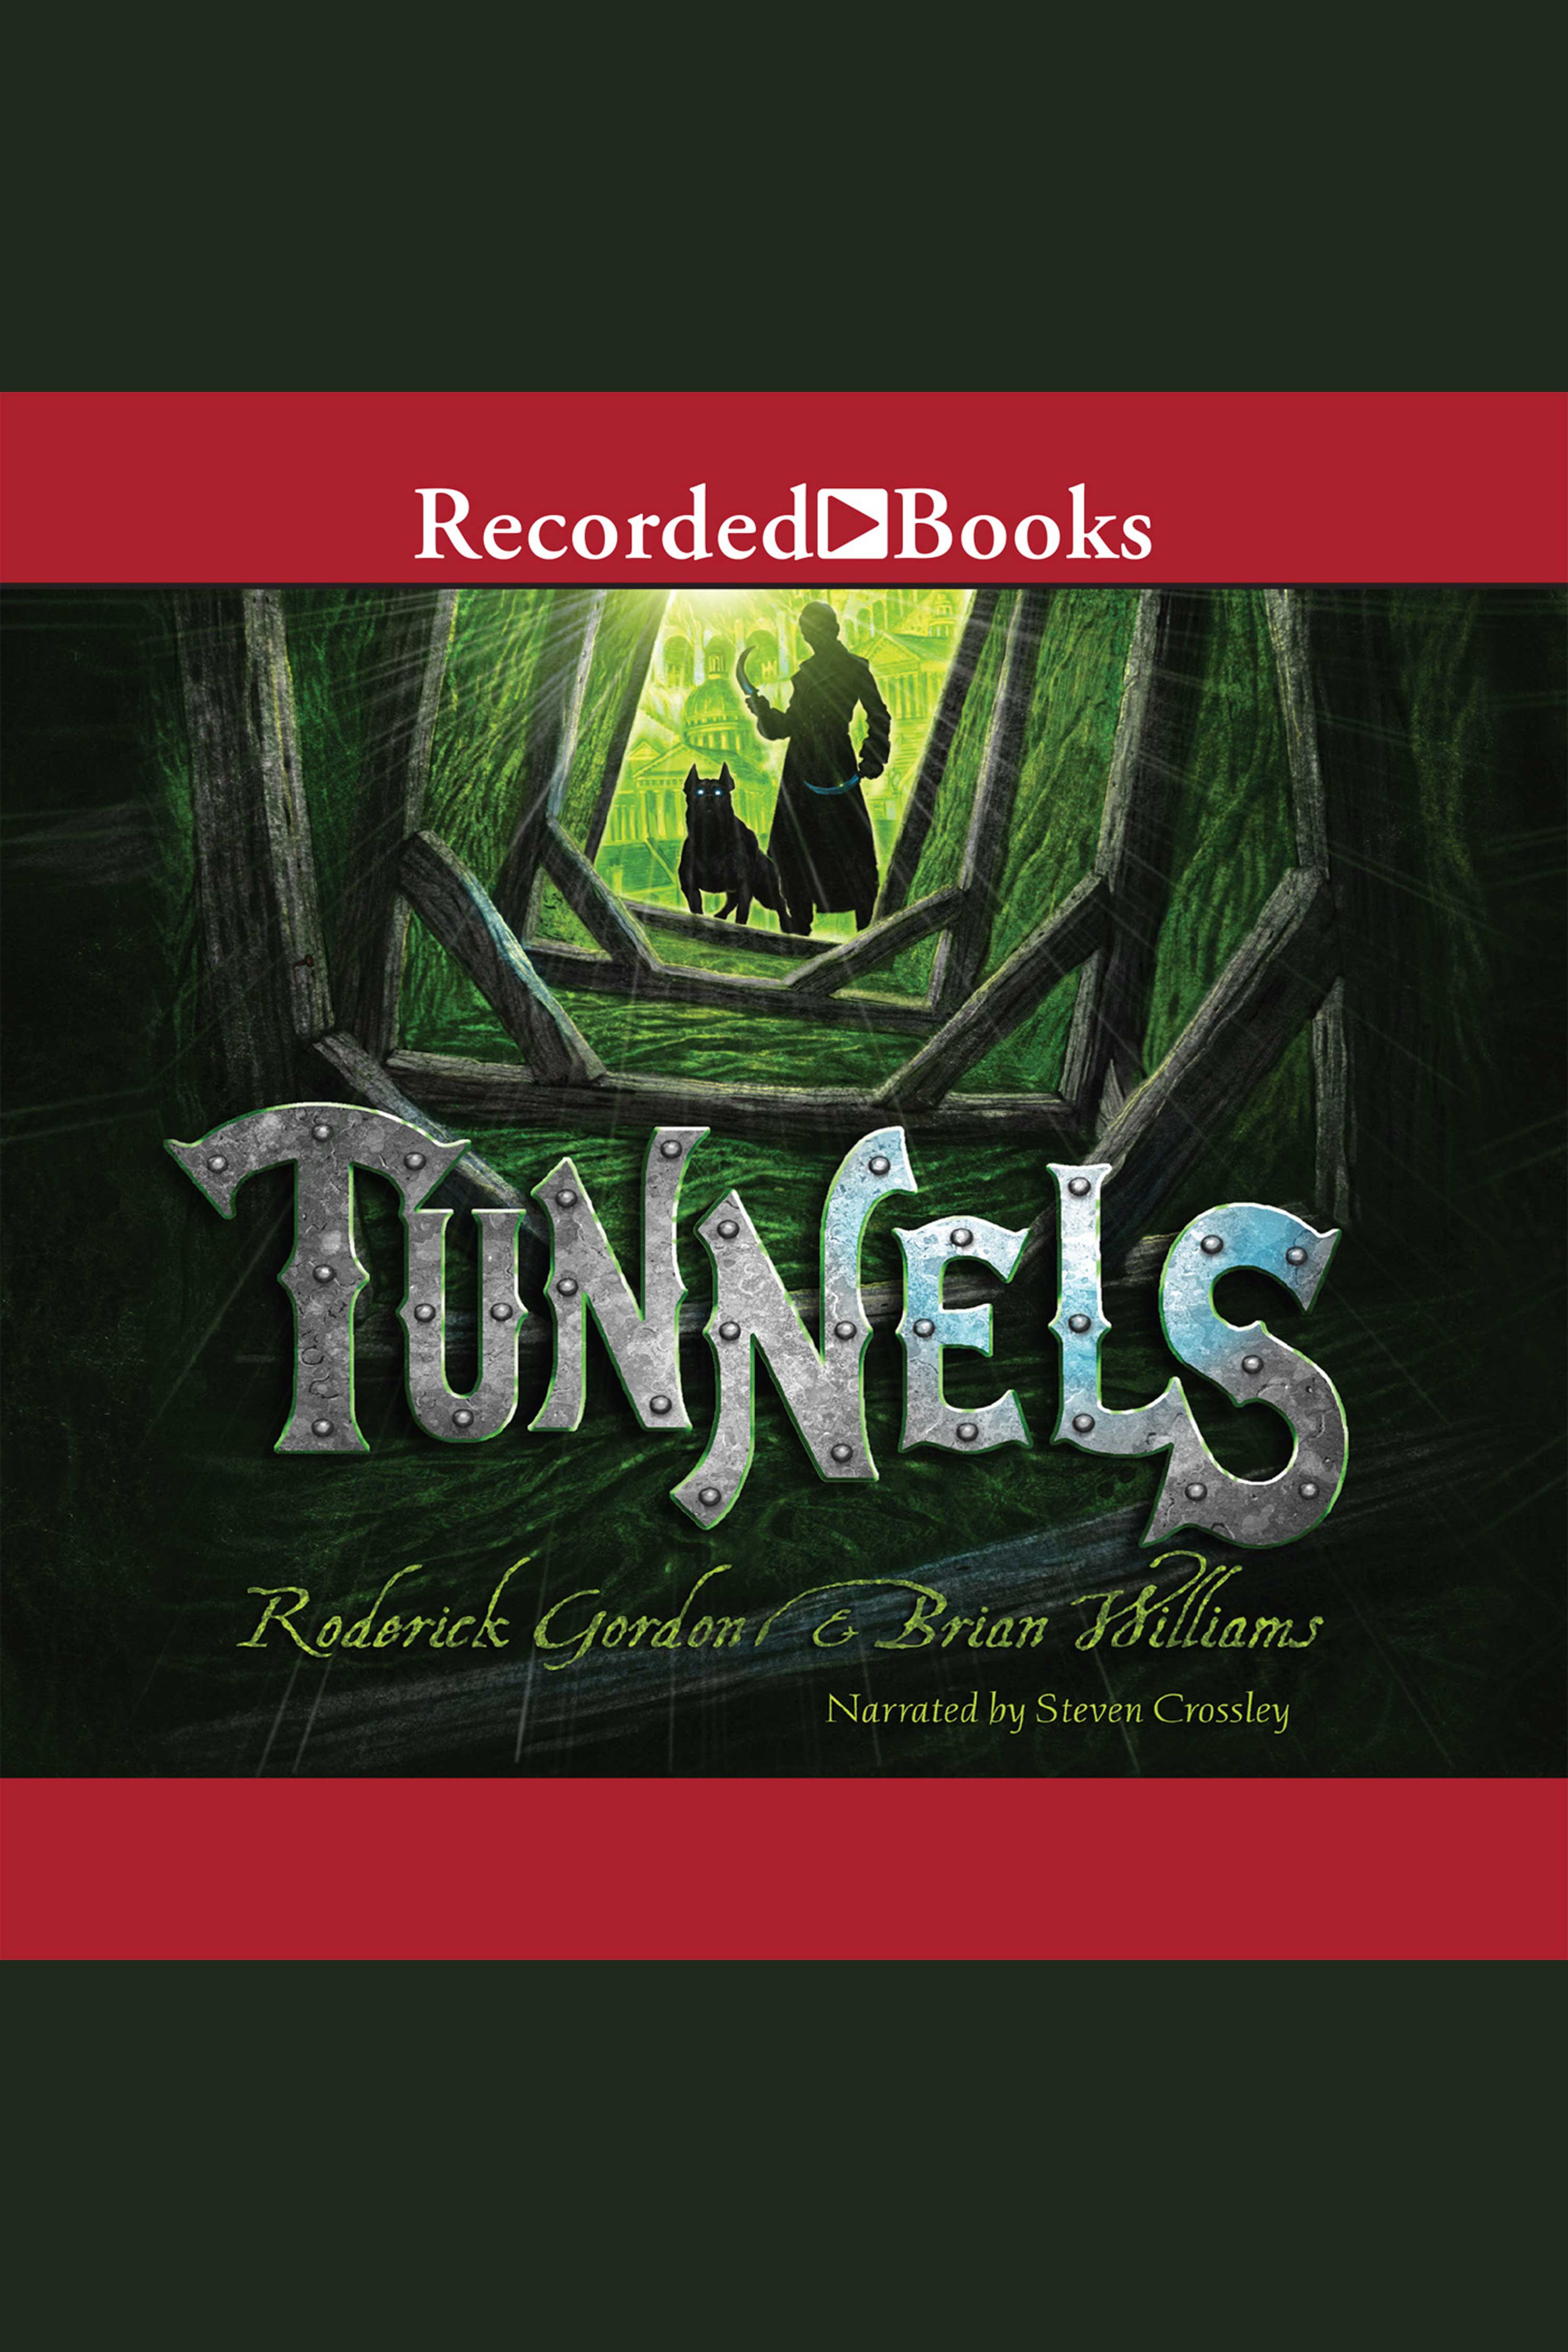 Tunnels cover image